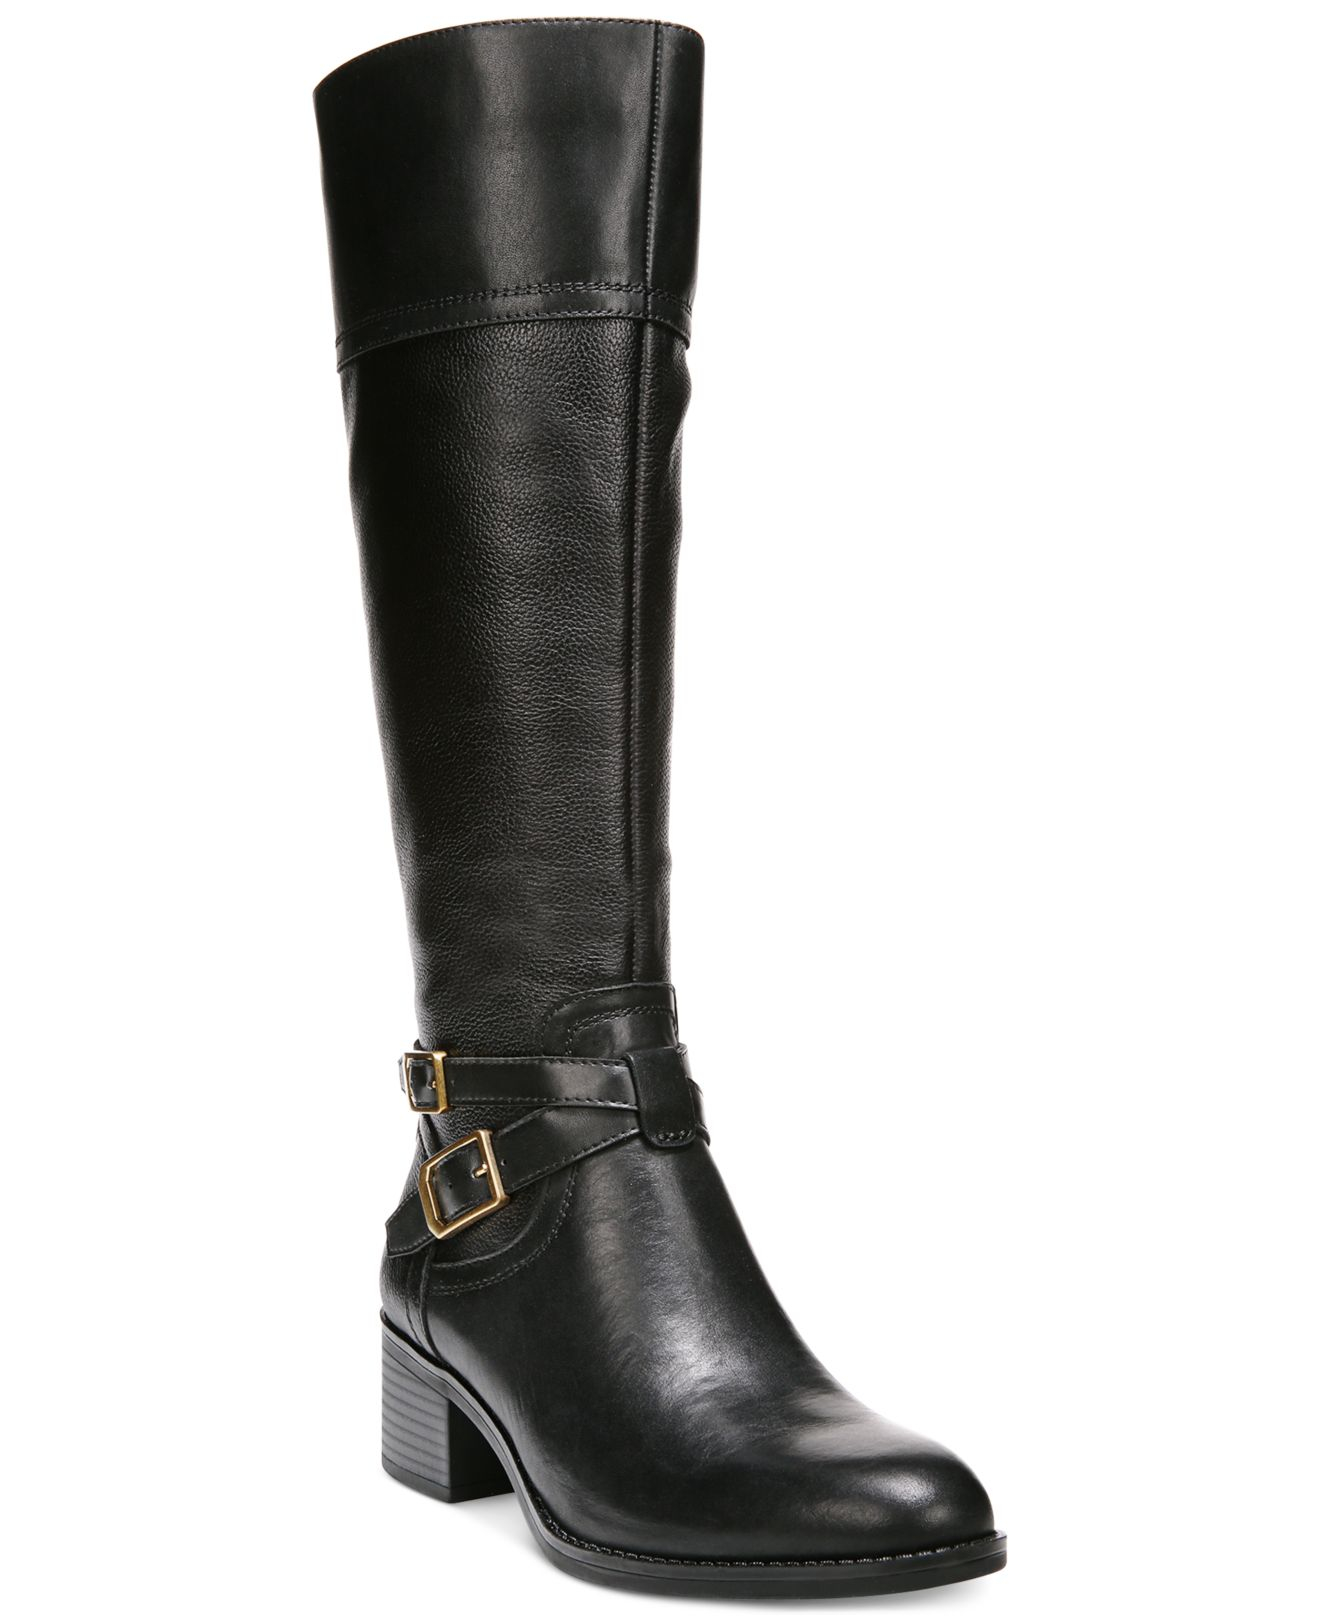 Lyst - Franco Sarto Lapis Wide Calf Riding Boots in Black